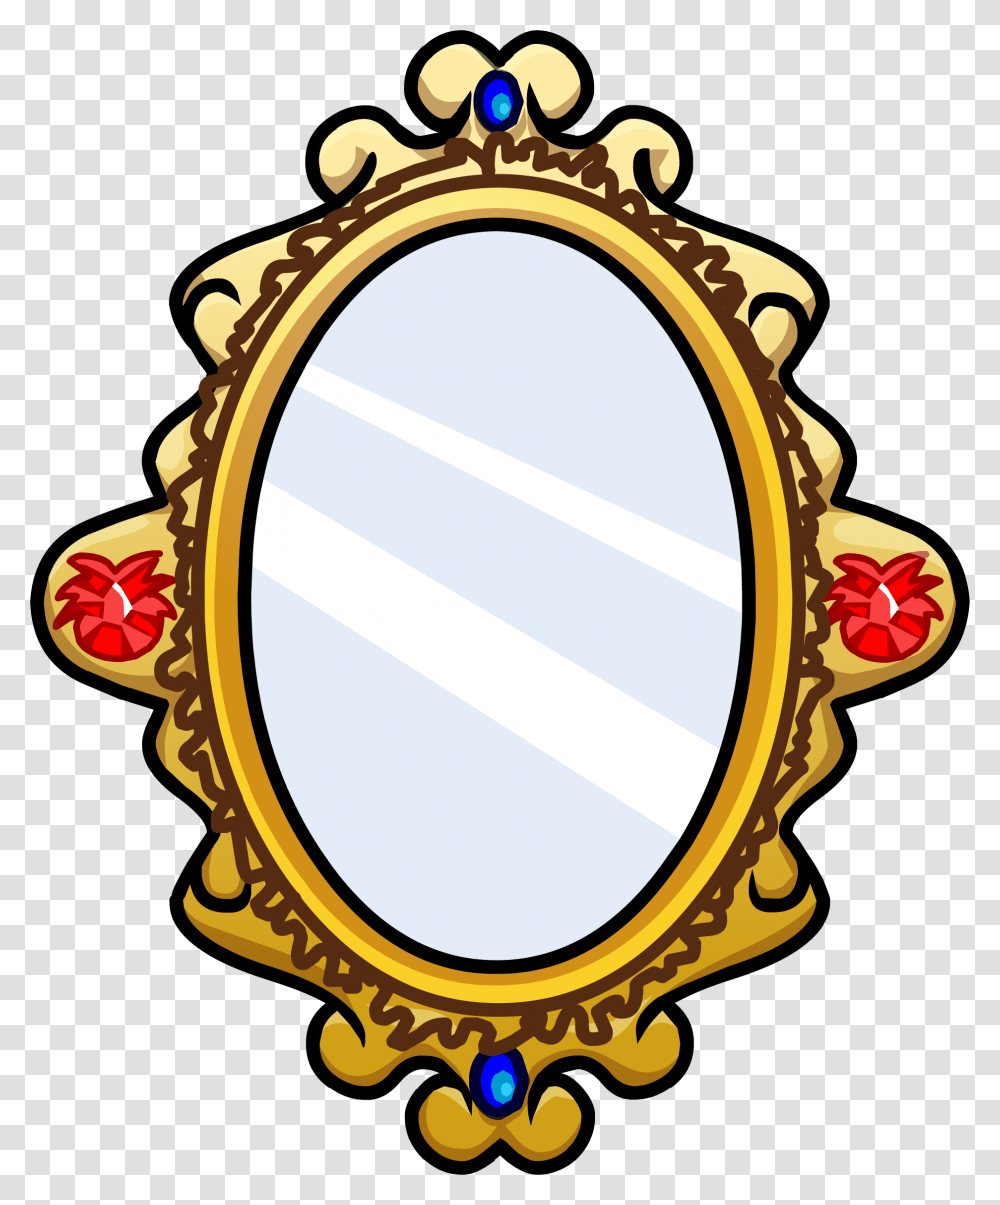 Mirror Clipart Pencil And In Color Mirror Wall Mirror, Oval Transparent Png